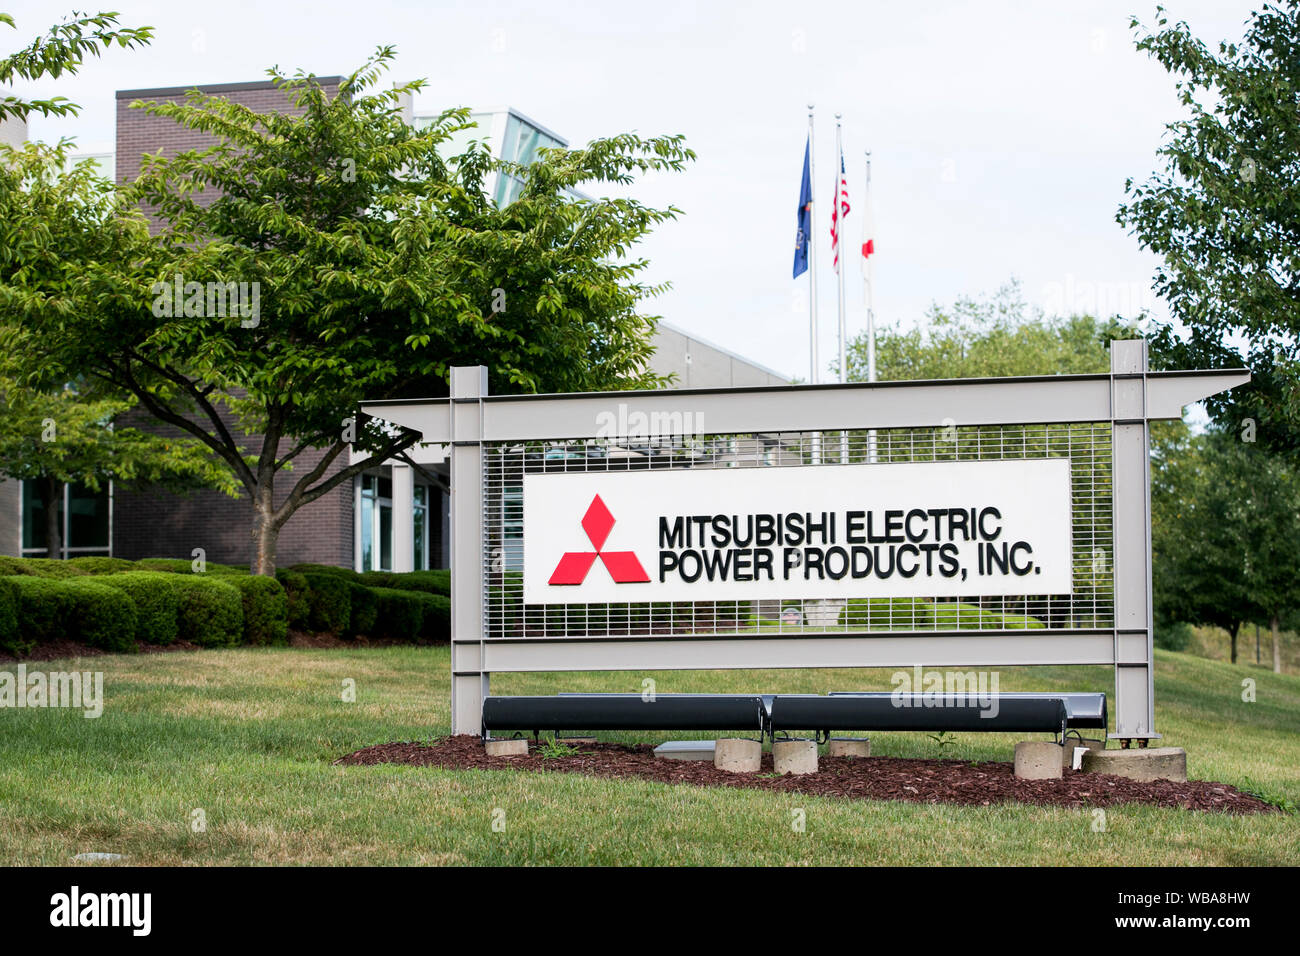 A logo sign outside of a facility occupied by Mitsubishi Electric Power Products in Warrendale, Pennsylvania on August 10, 2019. Stock Photo